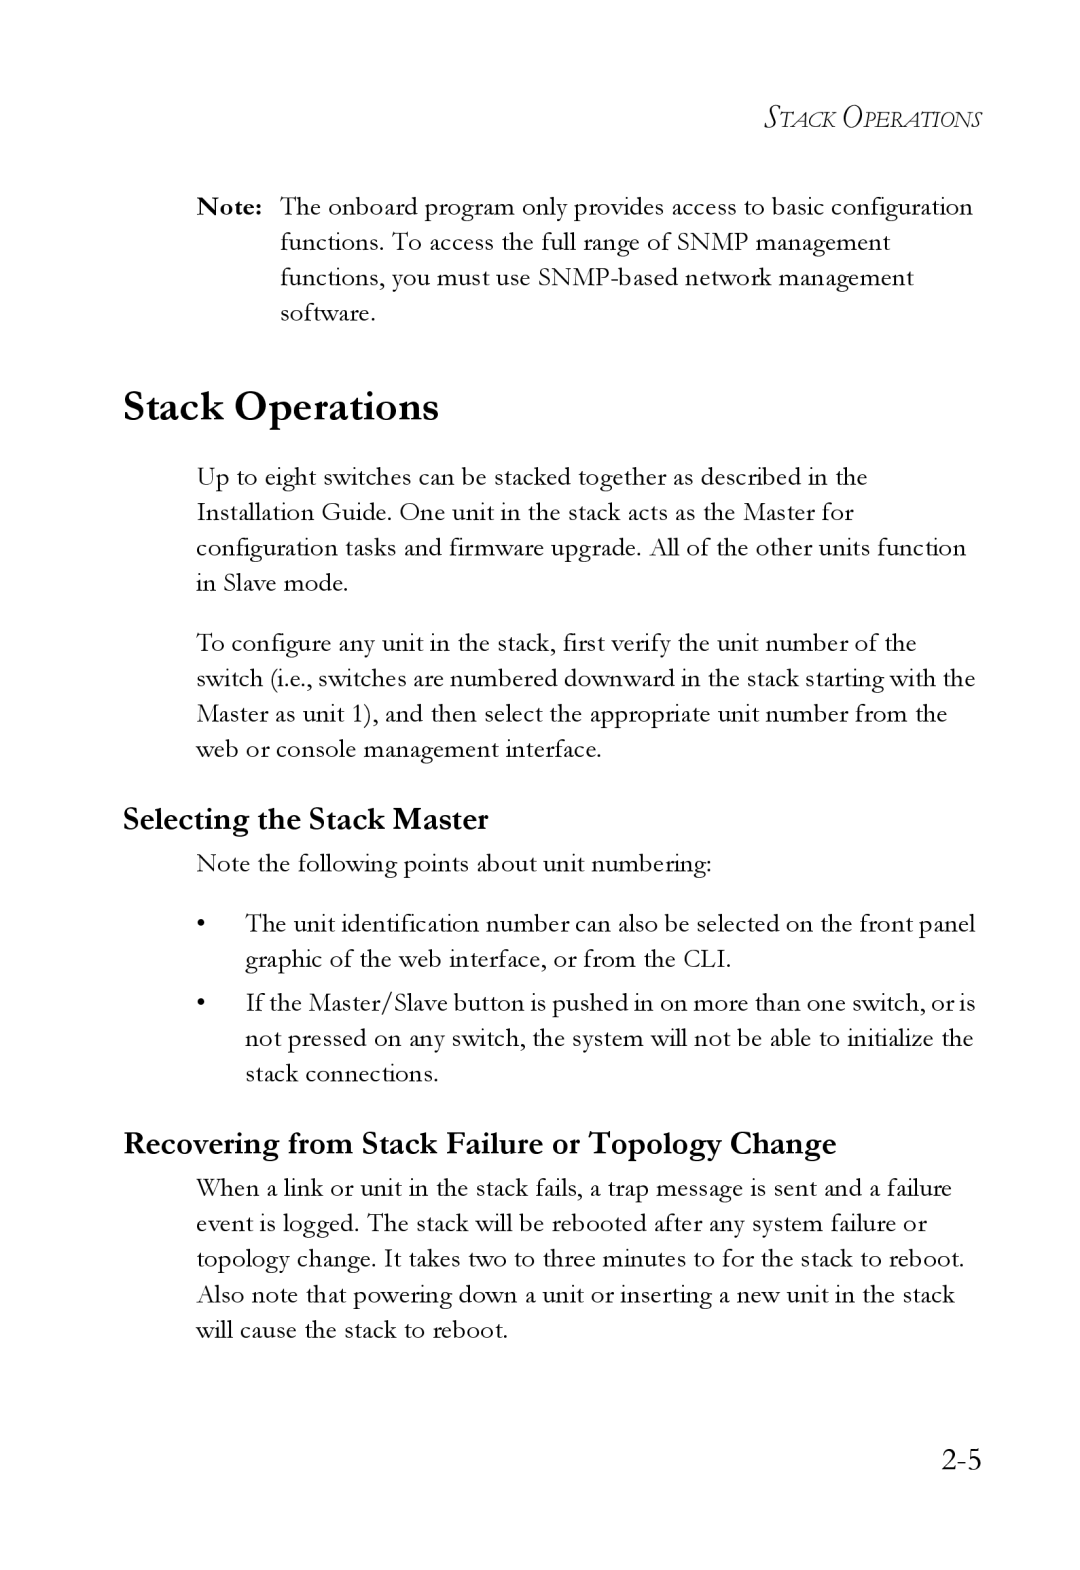 SMC Networks SMC6824M manual Stack Operations, Selecting the Stack Master, Recovering from Stack Failure or Topology Change 